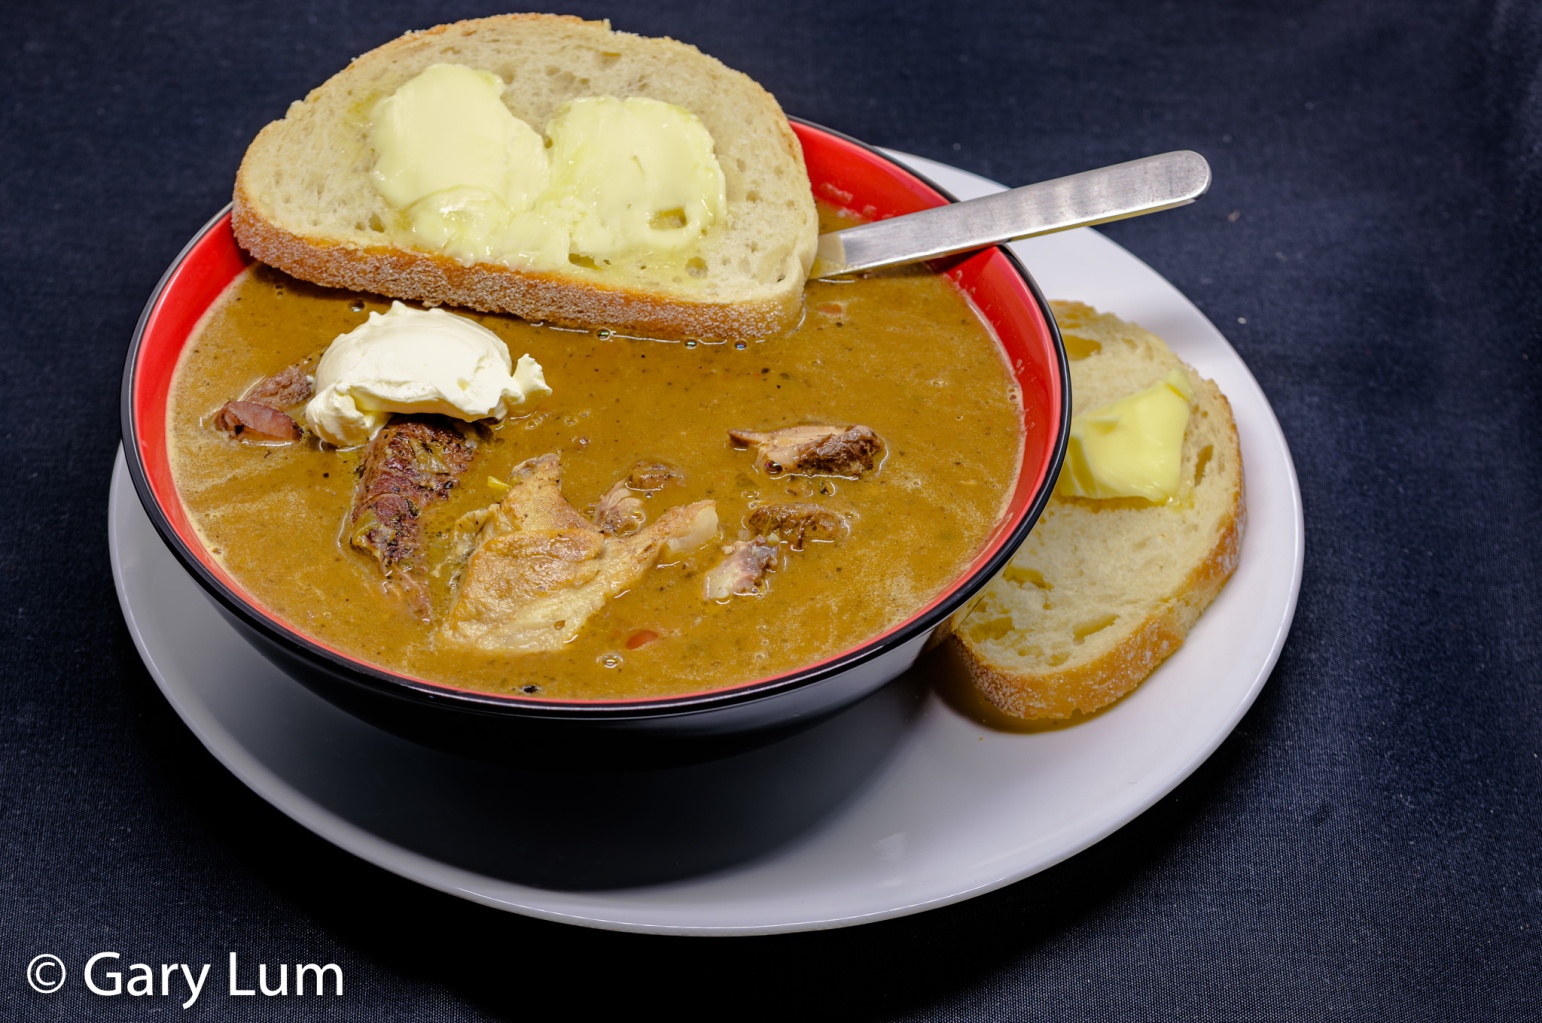 Irish stew cum soup with bread, butter, and sour cream.